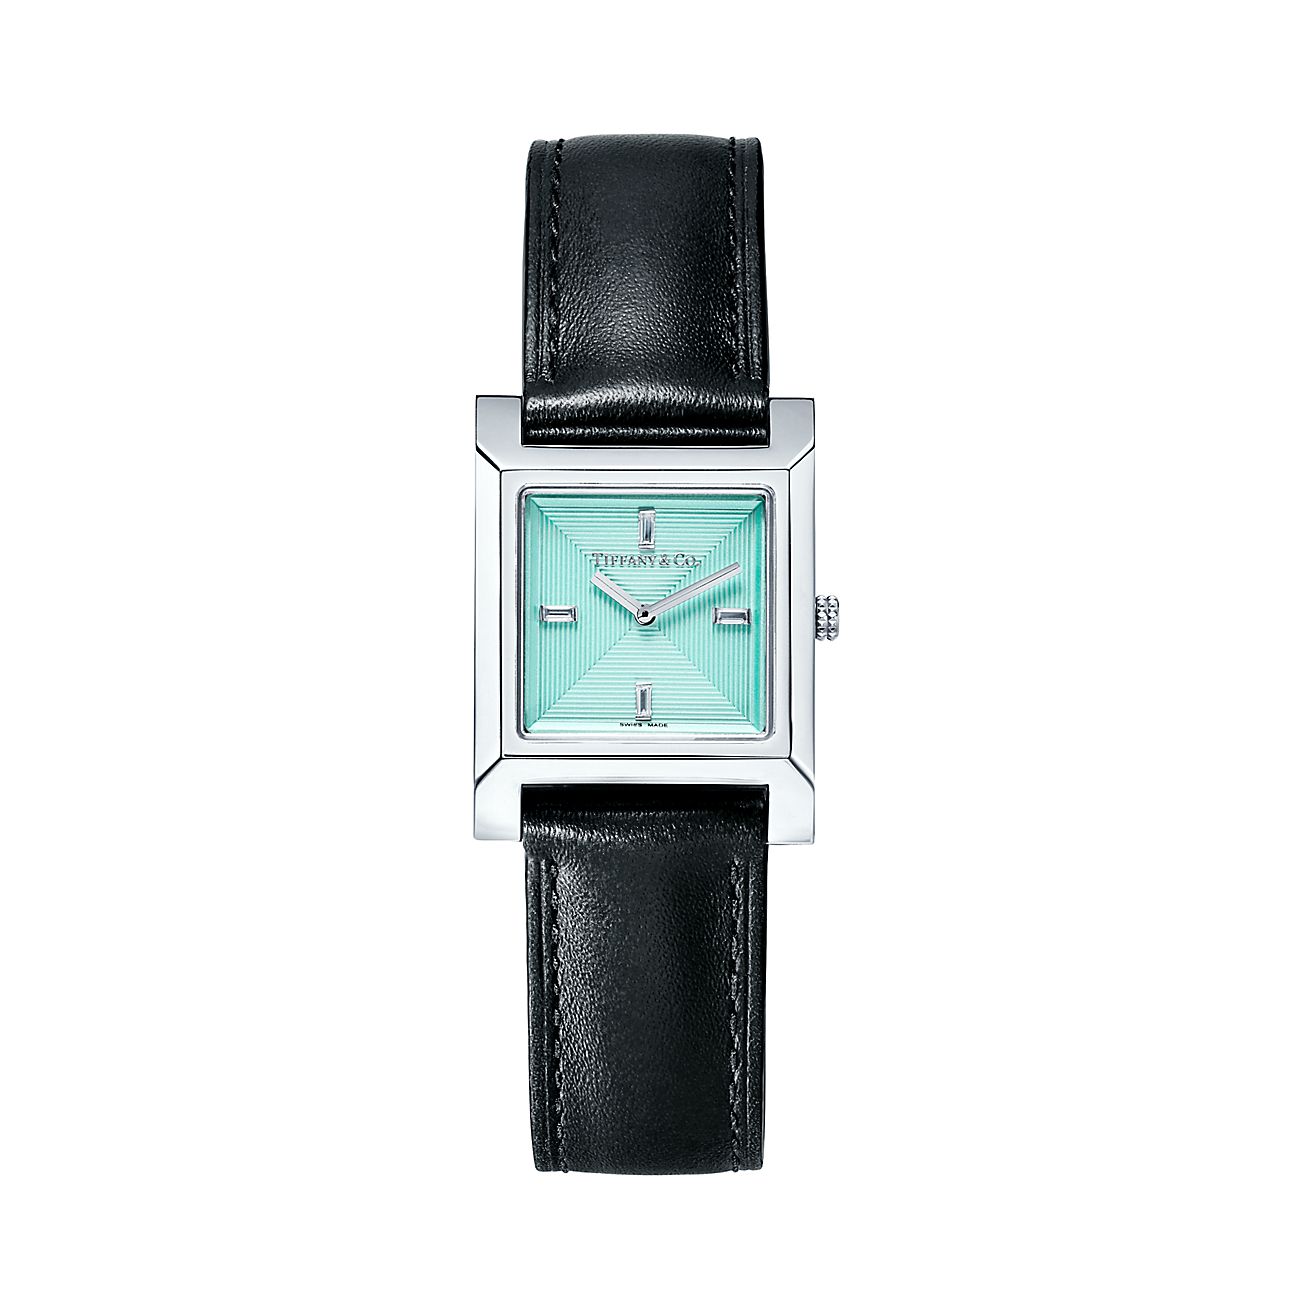 Tiffany 1837 Makers 22 mm square watch in stainless steel with a